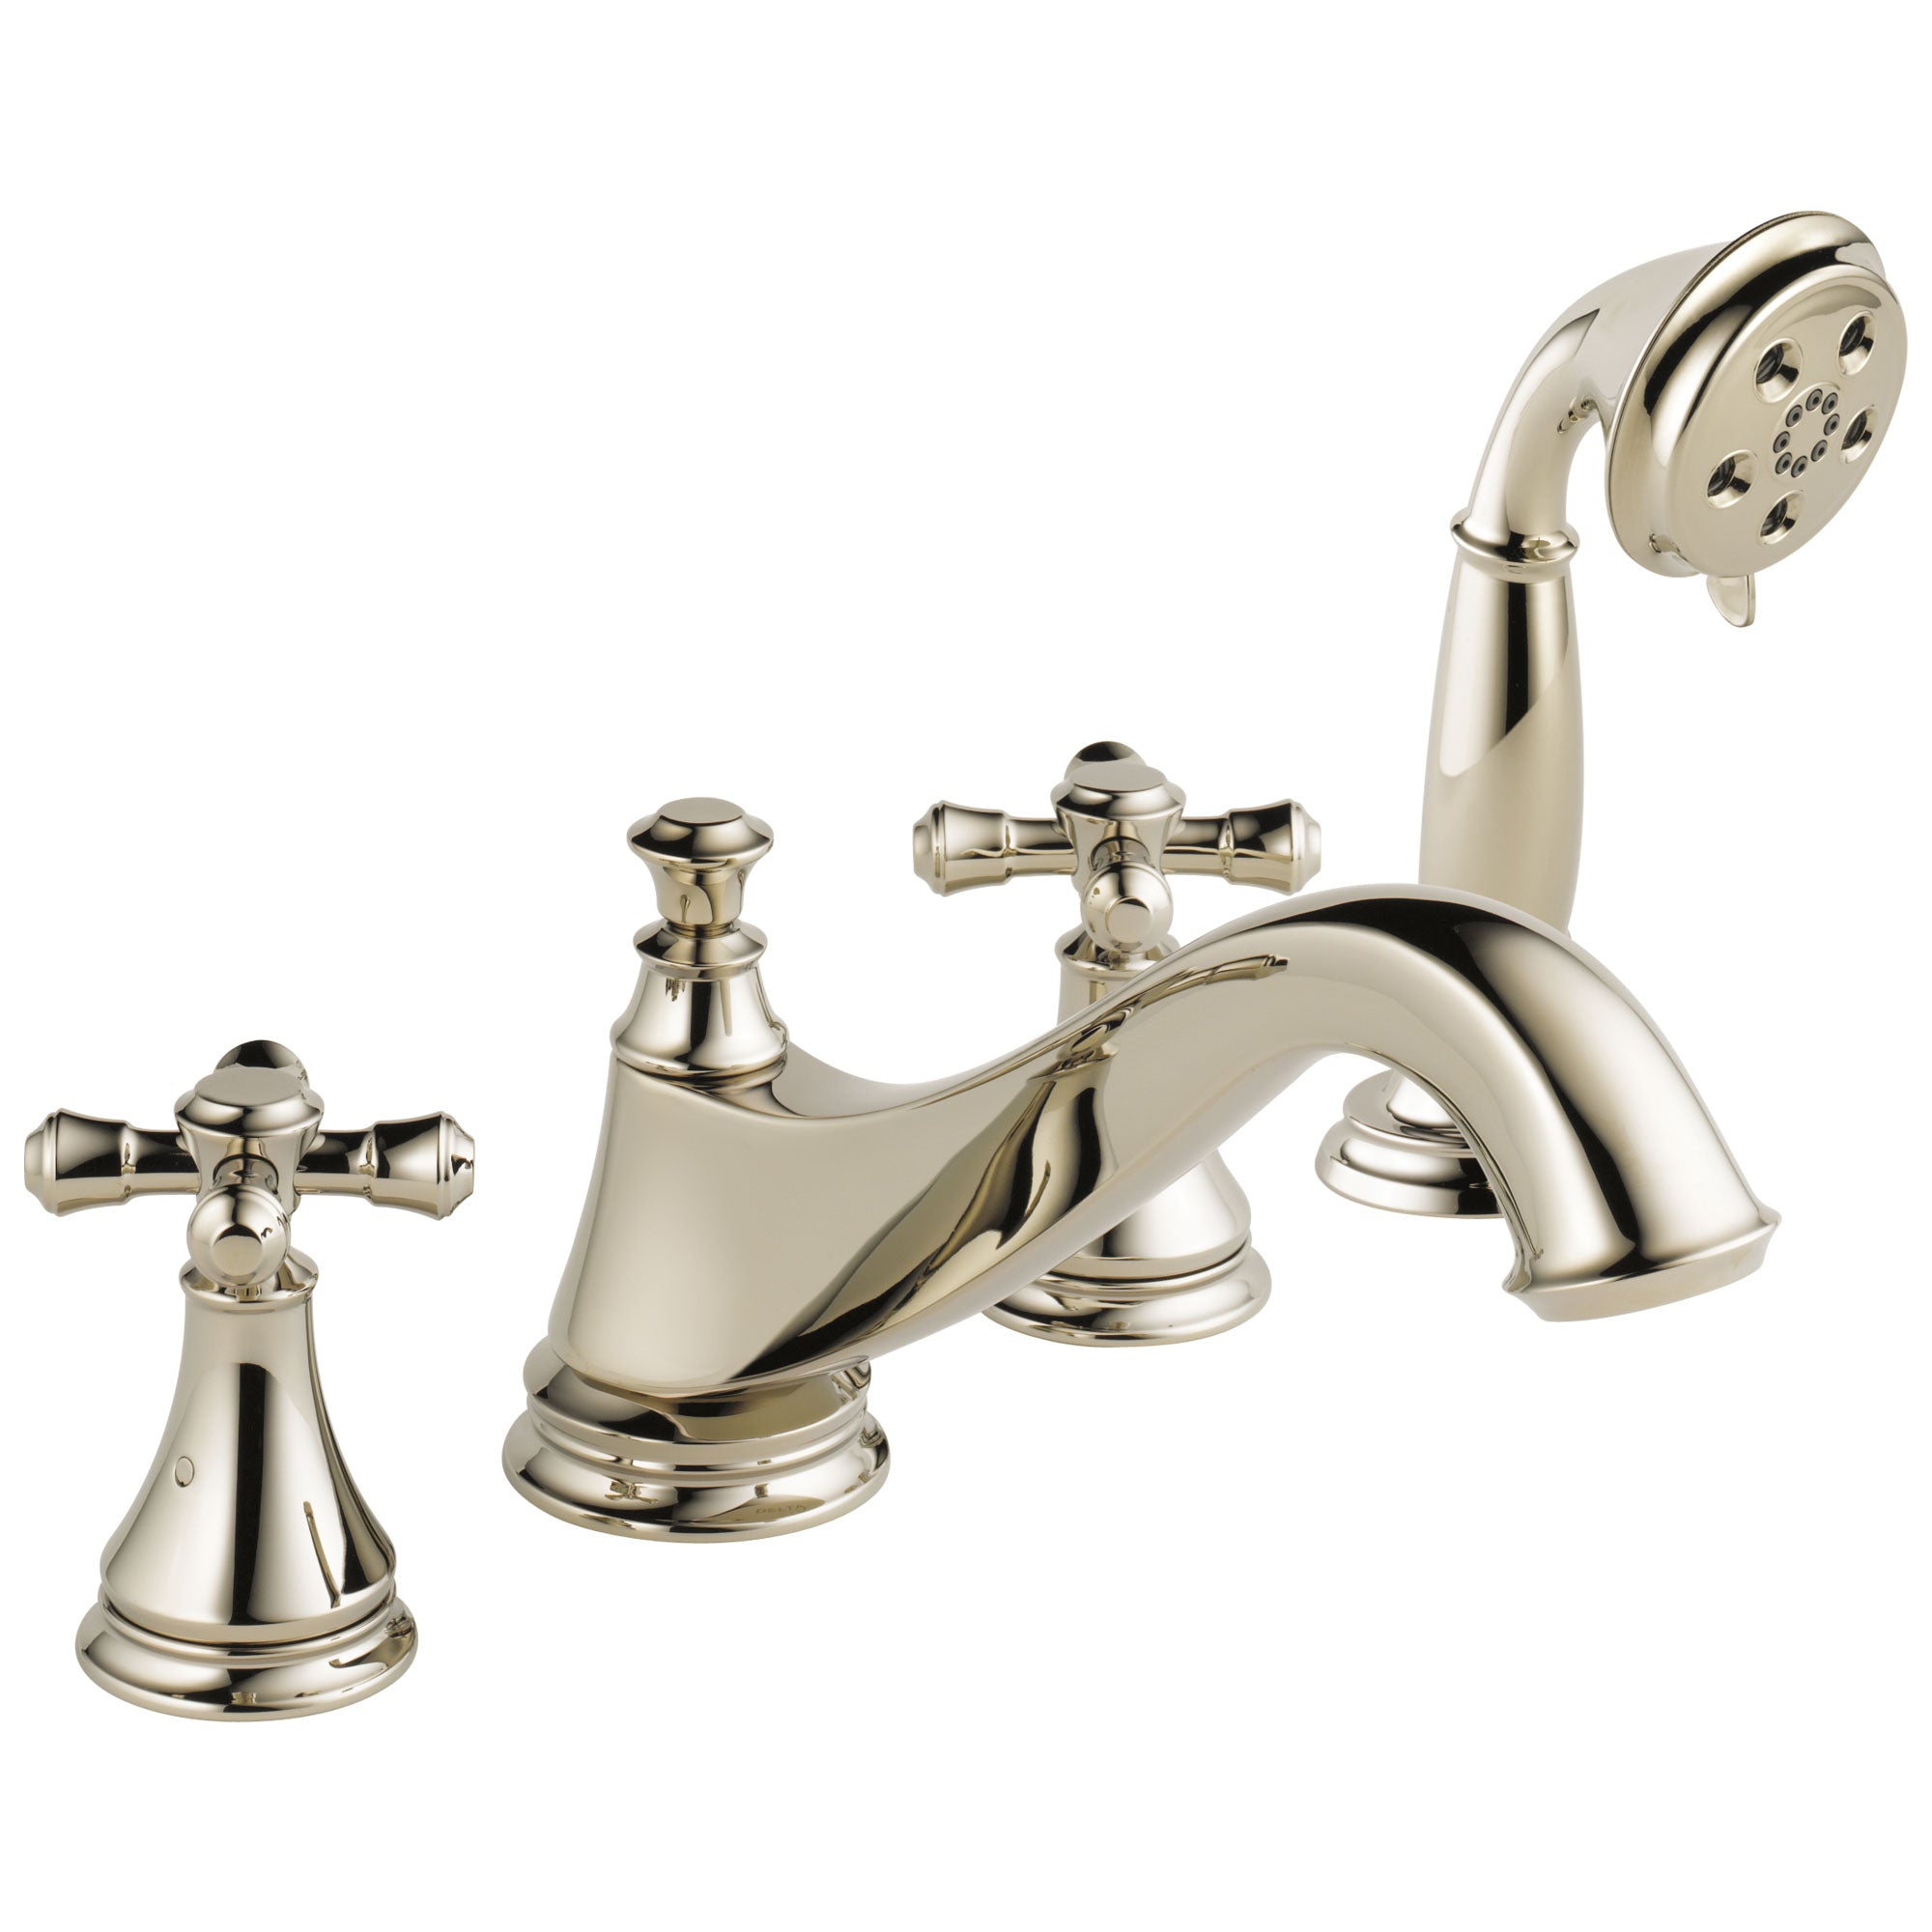 Delta Cassidy Collection Polished Nickel Classic Spout Roman Tub Filler Faucet Trim Kit with Hand Shower INCLUDES (2) Cross Handles and Rough-in Valve D1412V